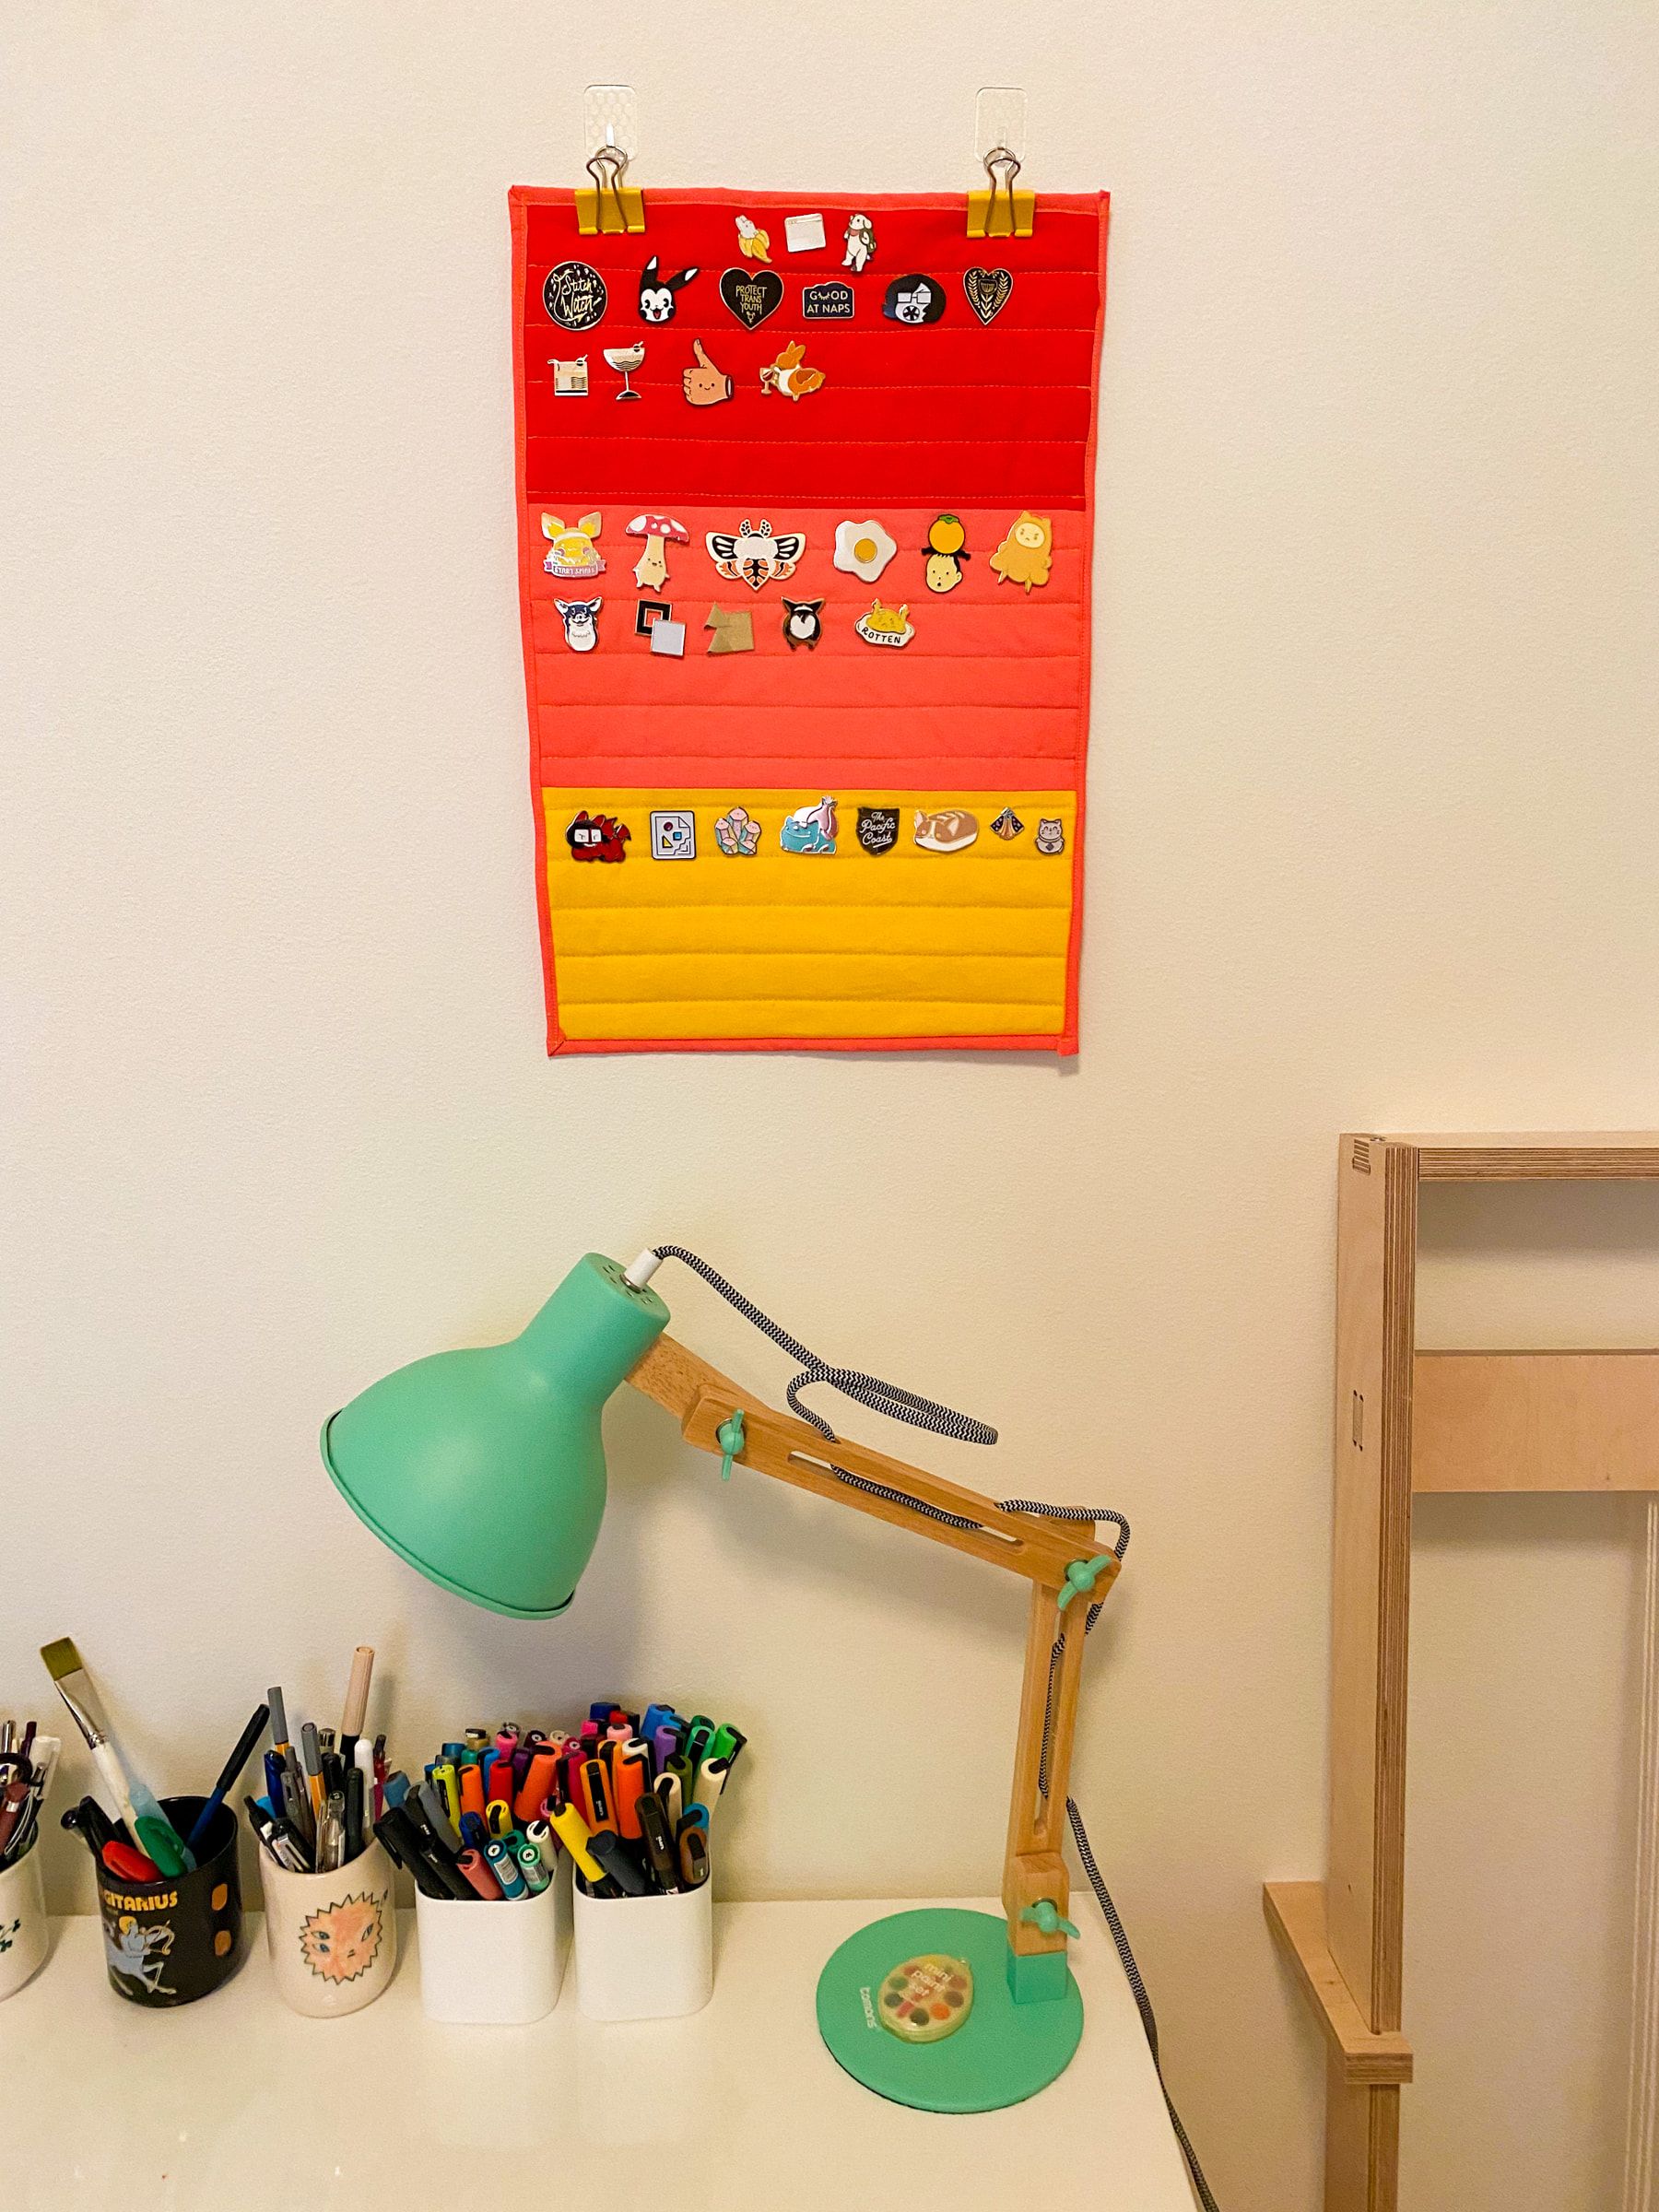 The banner hanging over my desk, which is white metal with a teal lamp on it. There's pen cups full of pens and markers.